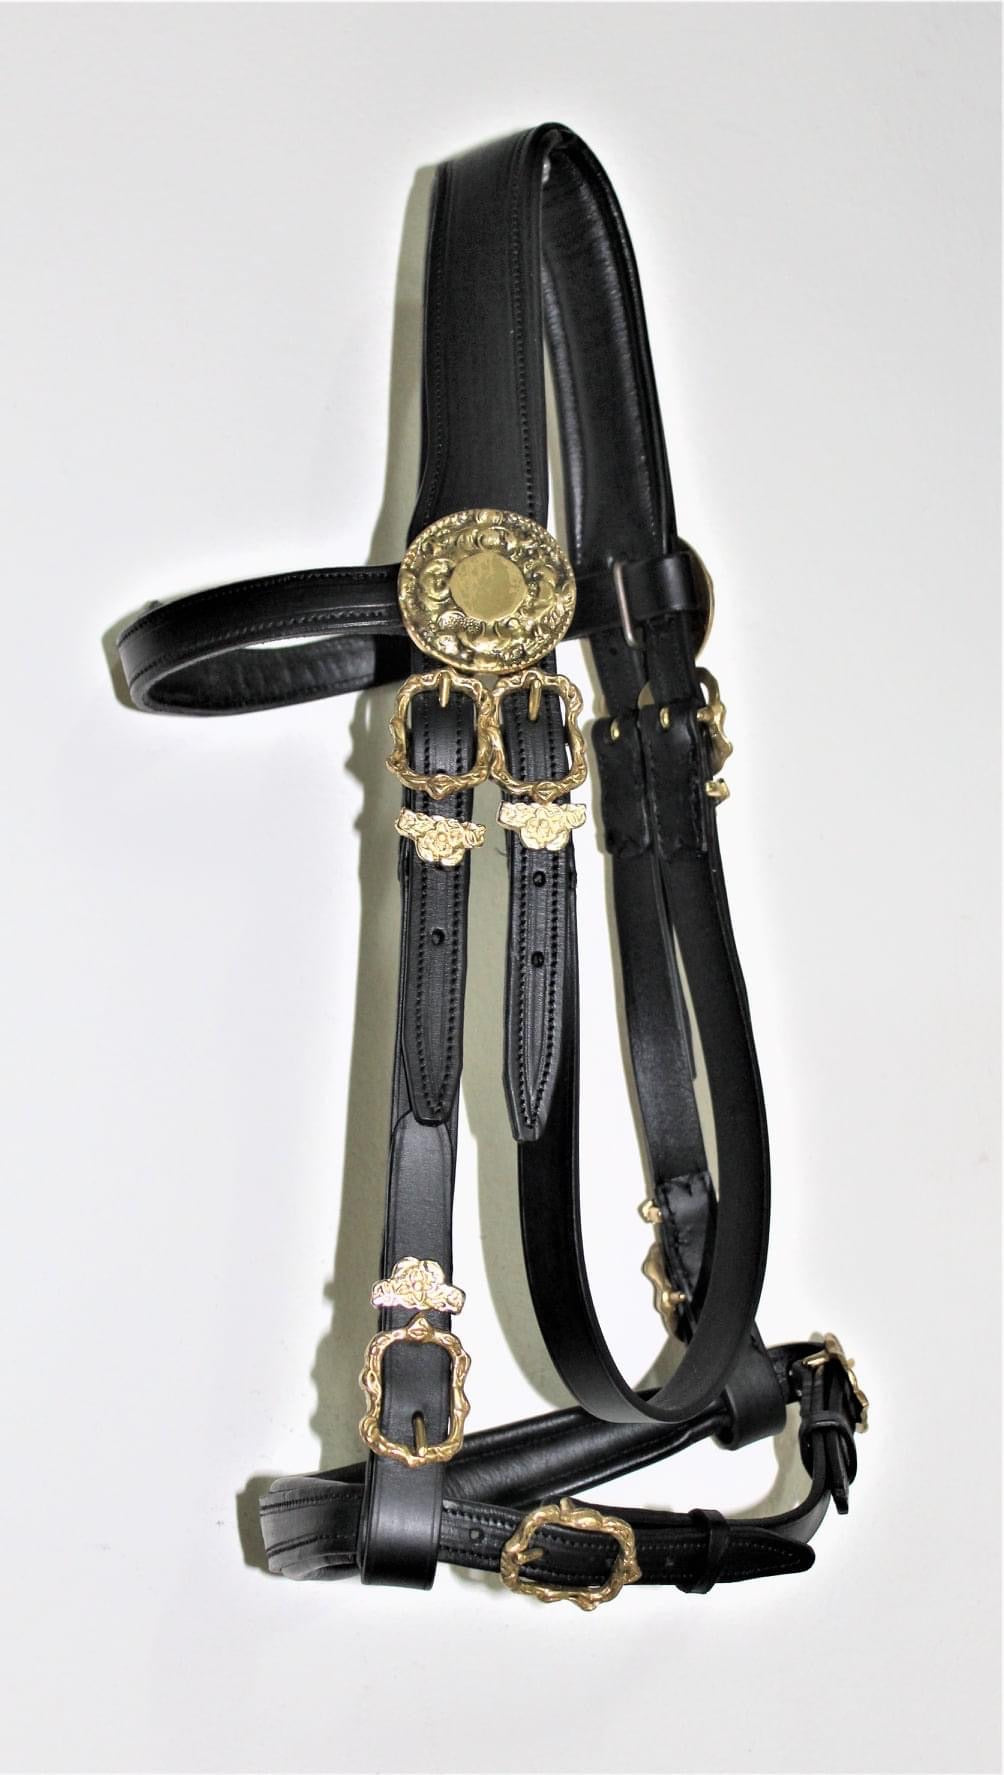 Handcrafted “Military” Bridle from VMCS